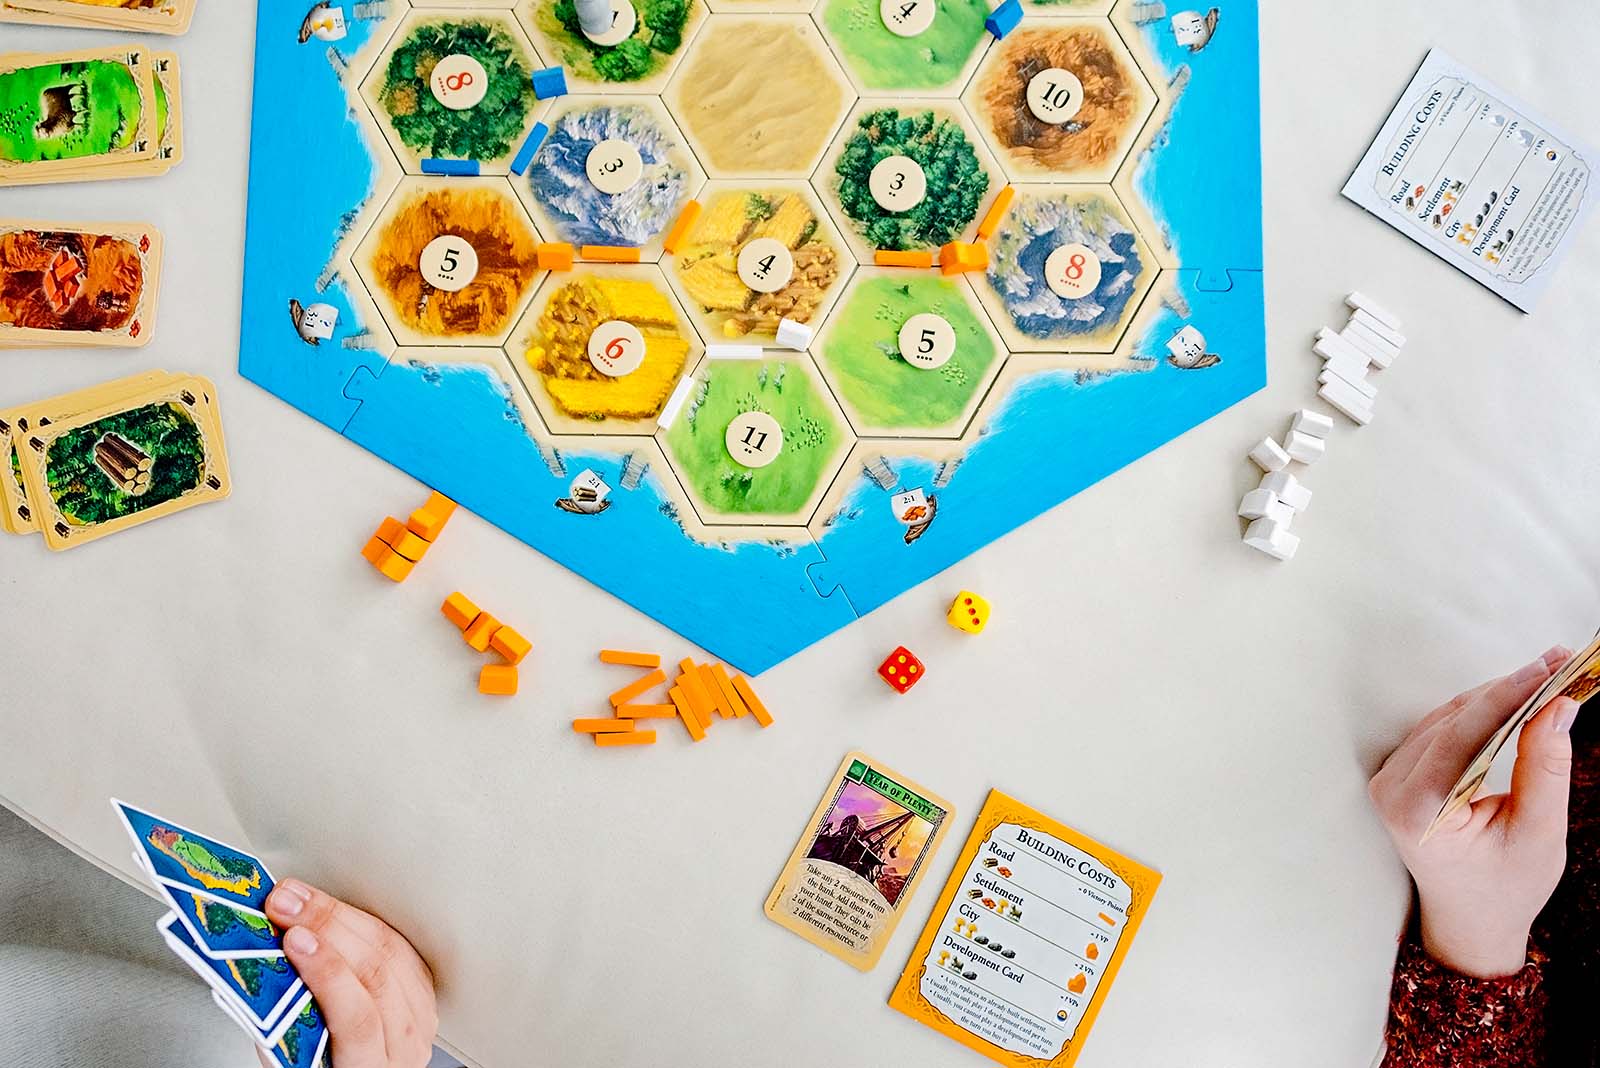 Settlers of Catan Review